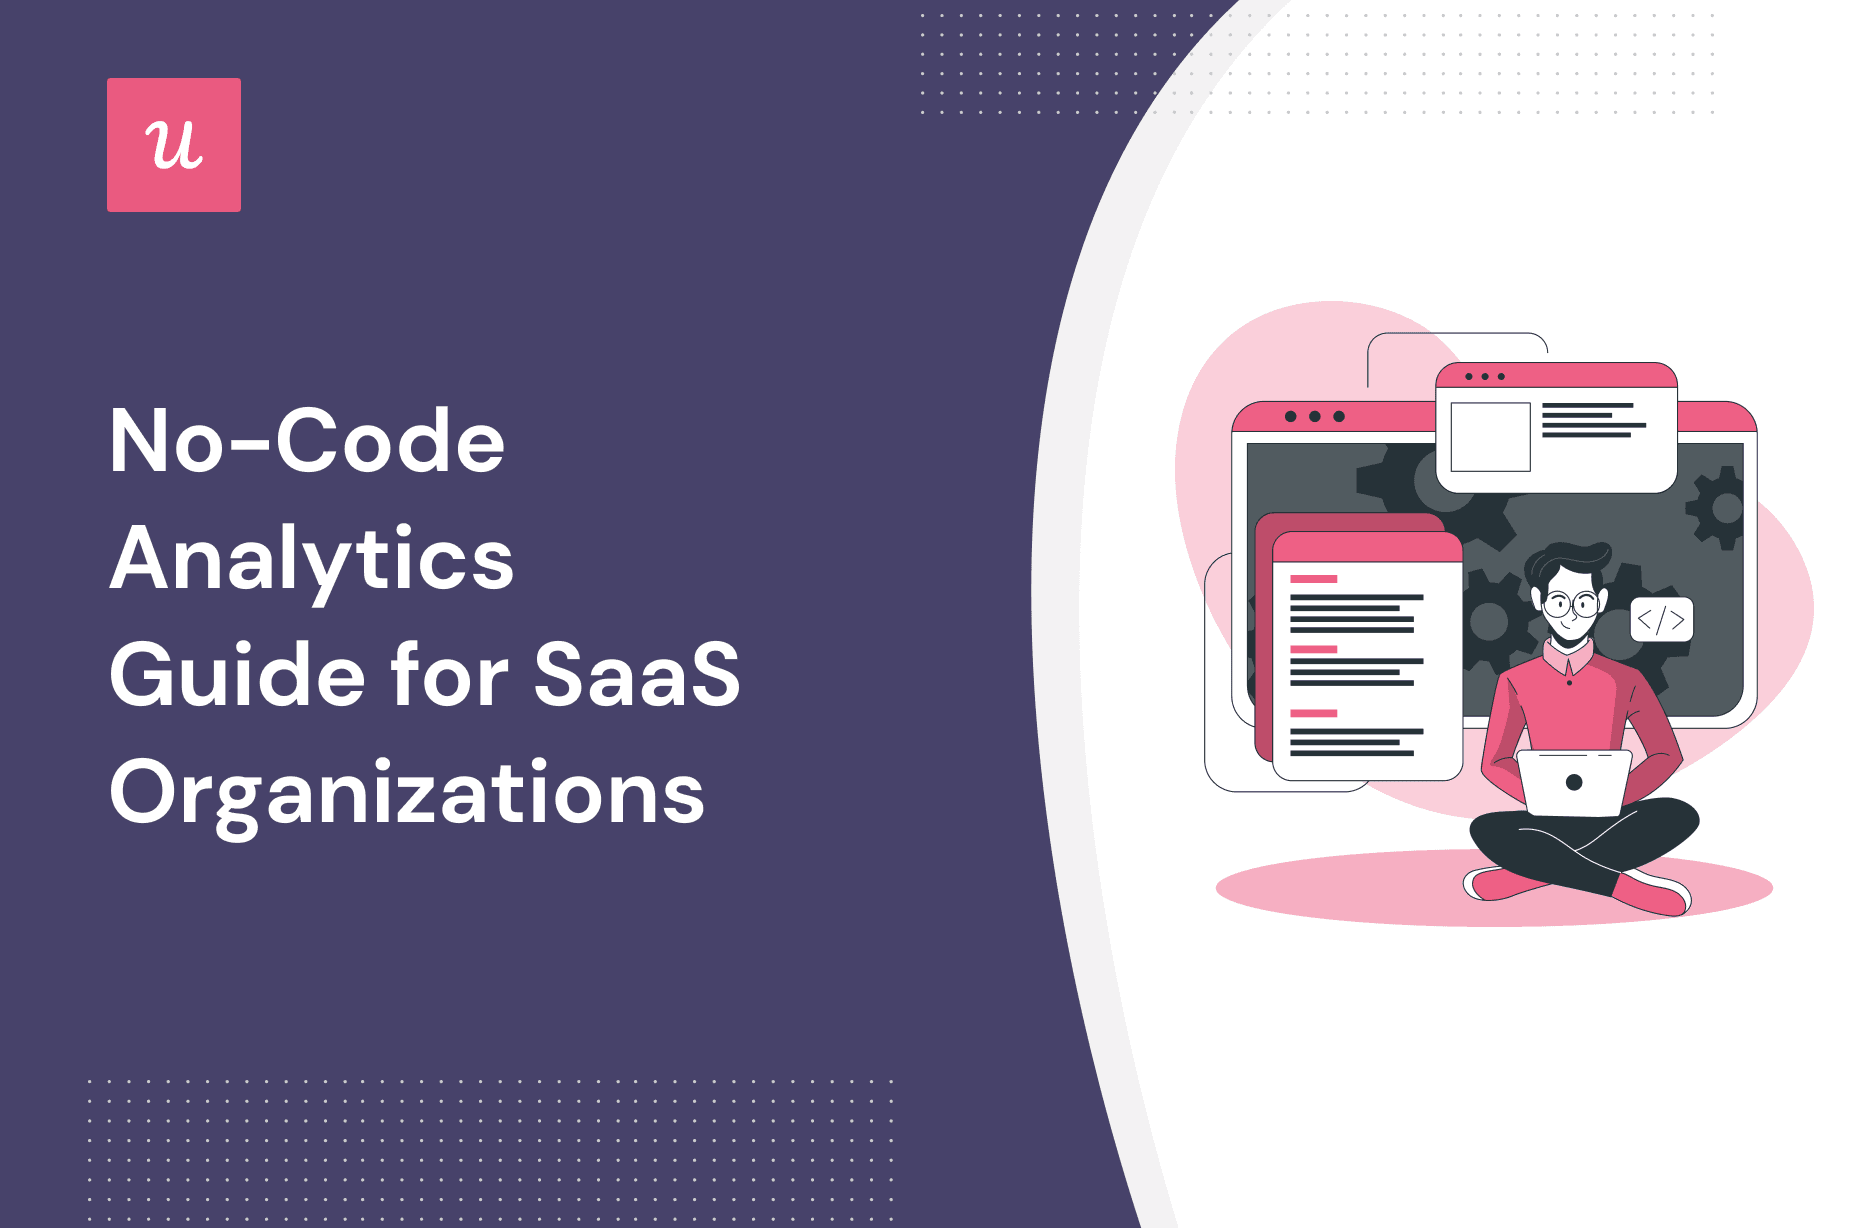 No-Code Analytics Guide for SaaS Organizations cover